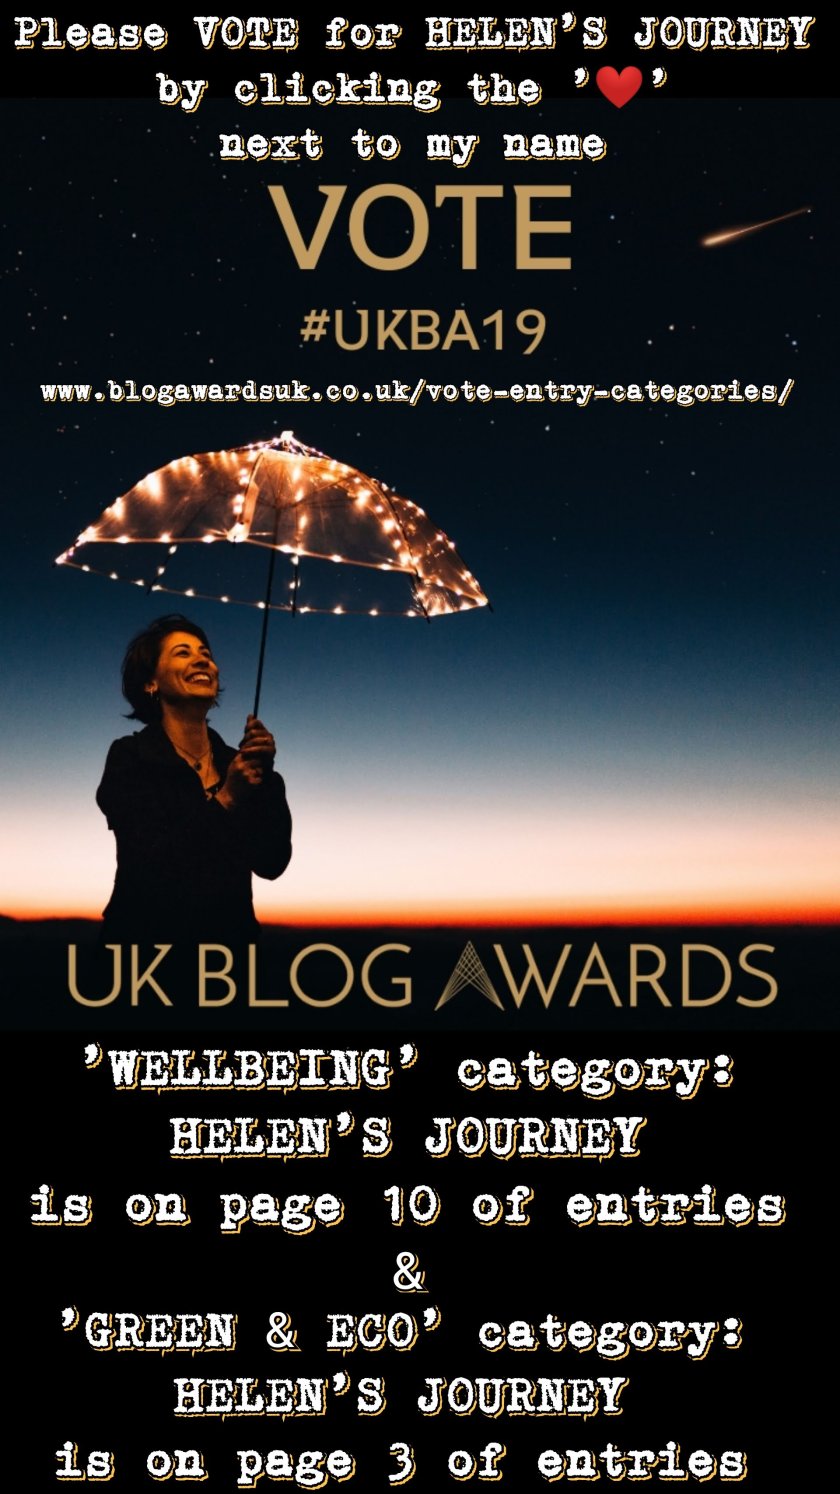 vote for helen's journey blog in the uk blog awards 2019 in category of wellbeing and also in the category of Green and Eco. voting instructions